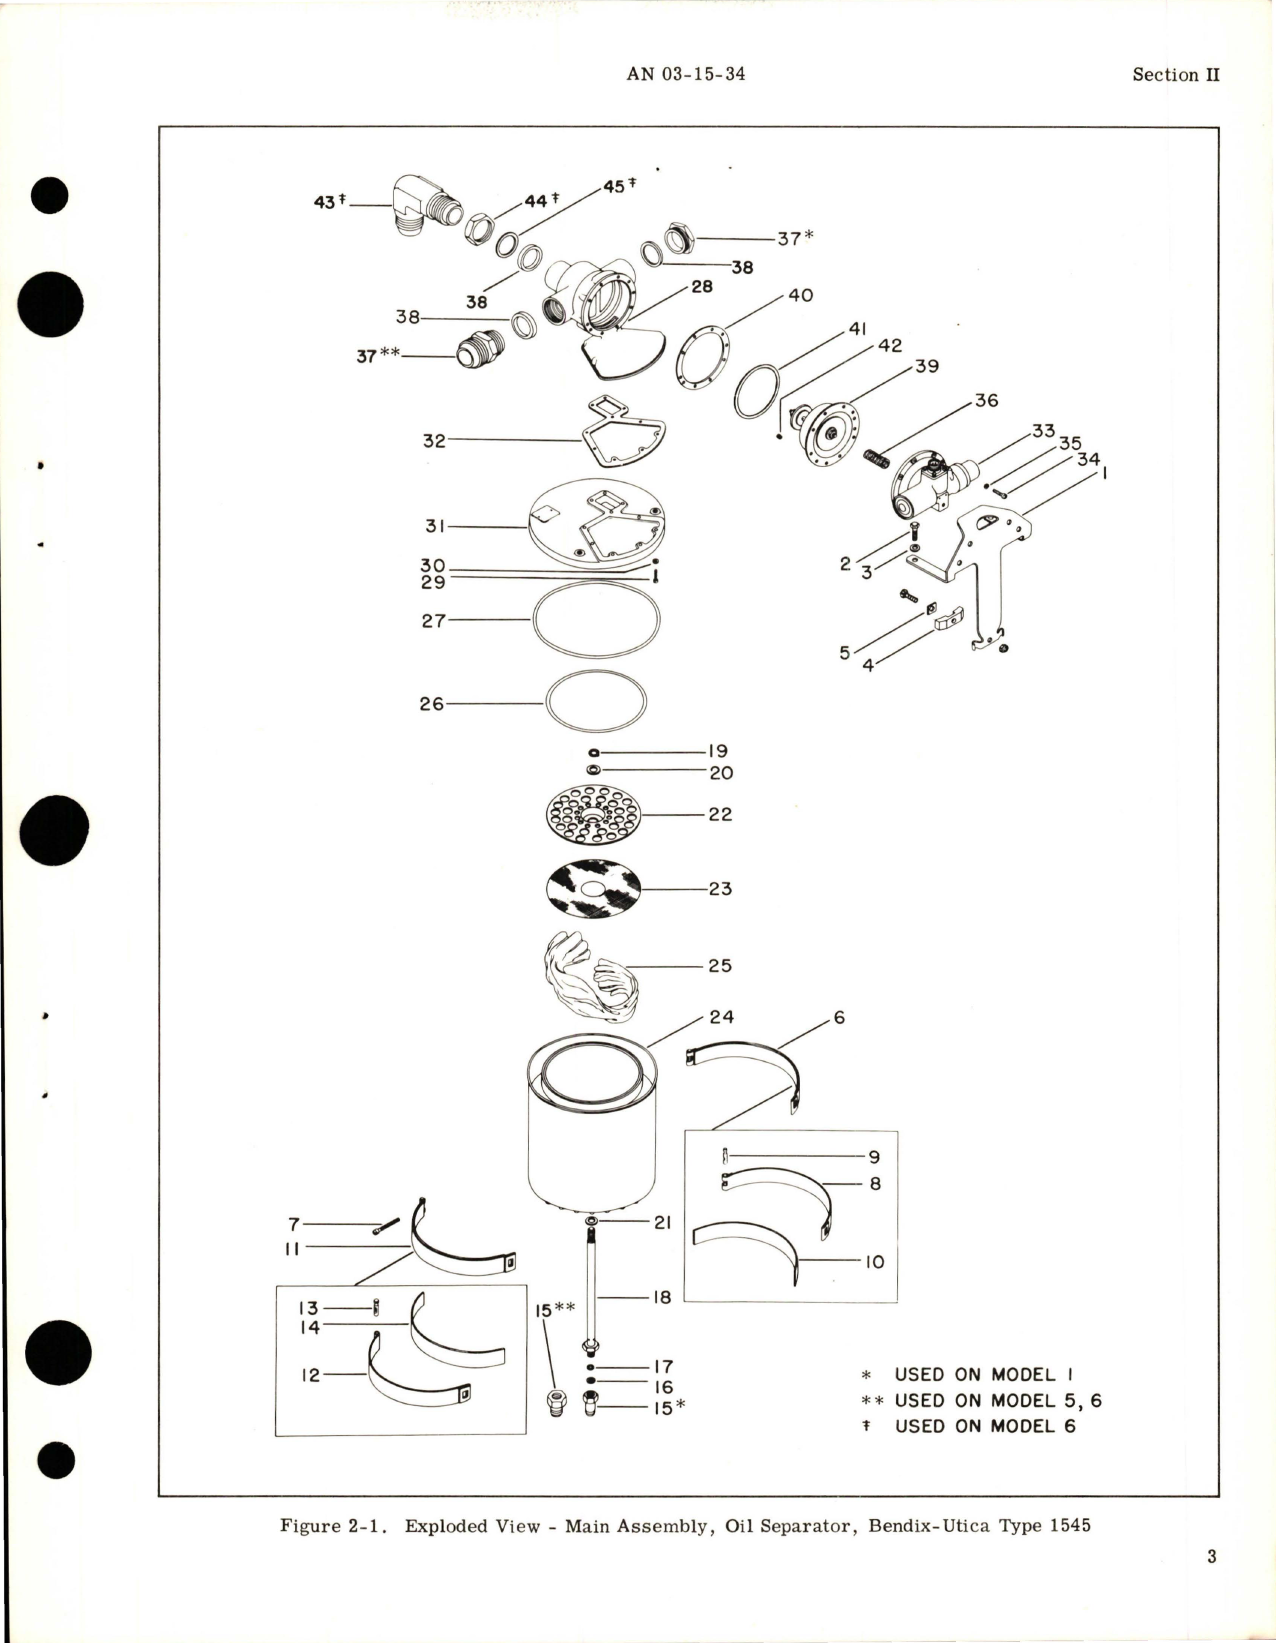 Sample page 7 from AirCorps Library document: Overhaul Instructions for Oil Separator